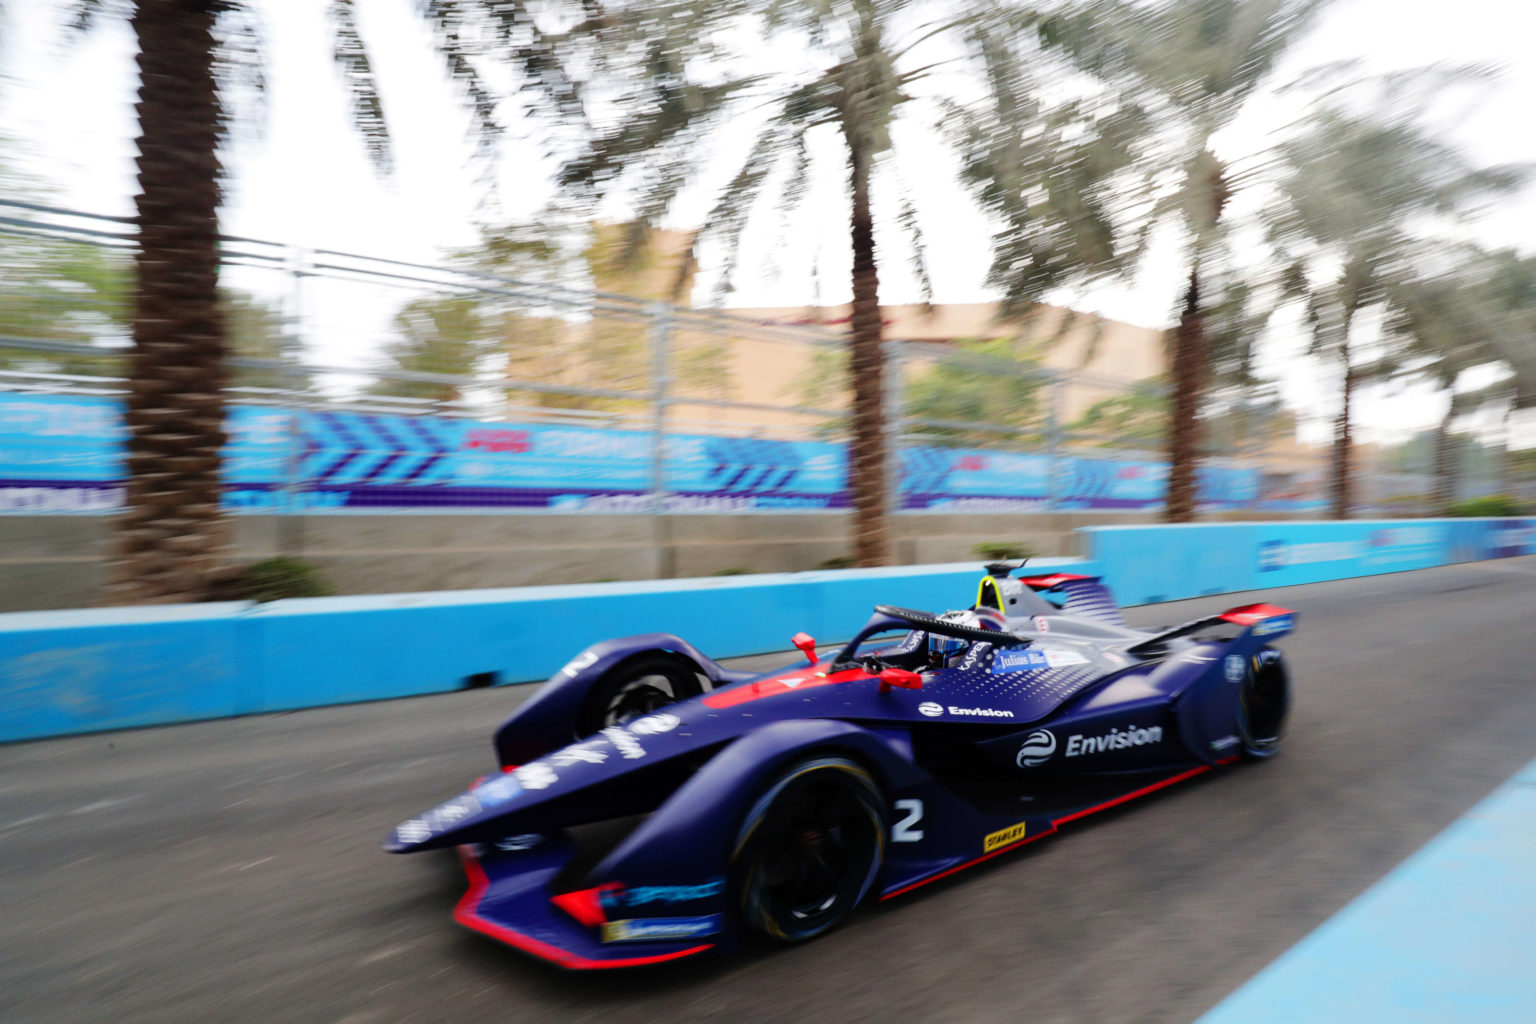 A navy and red racing car speeds down a track lined with blue signage and palm trees.